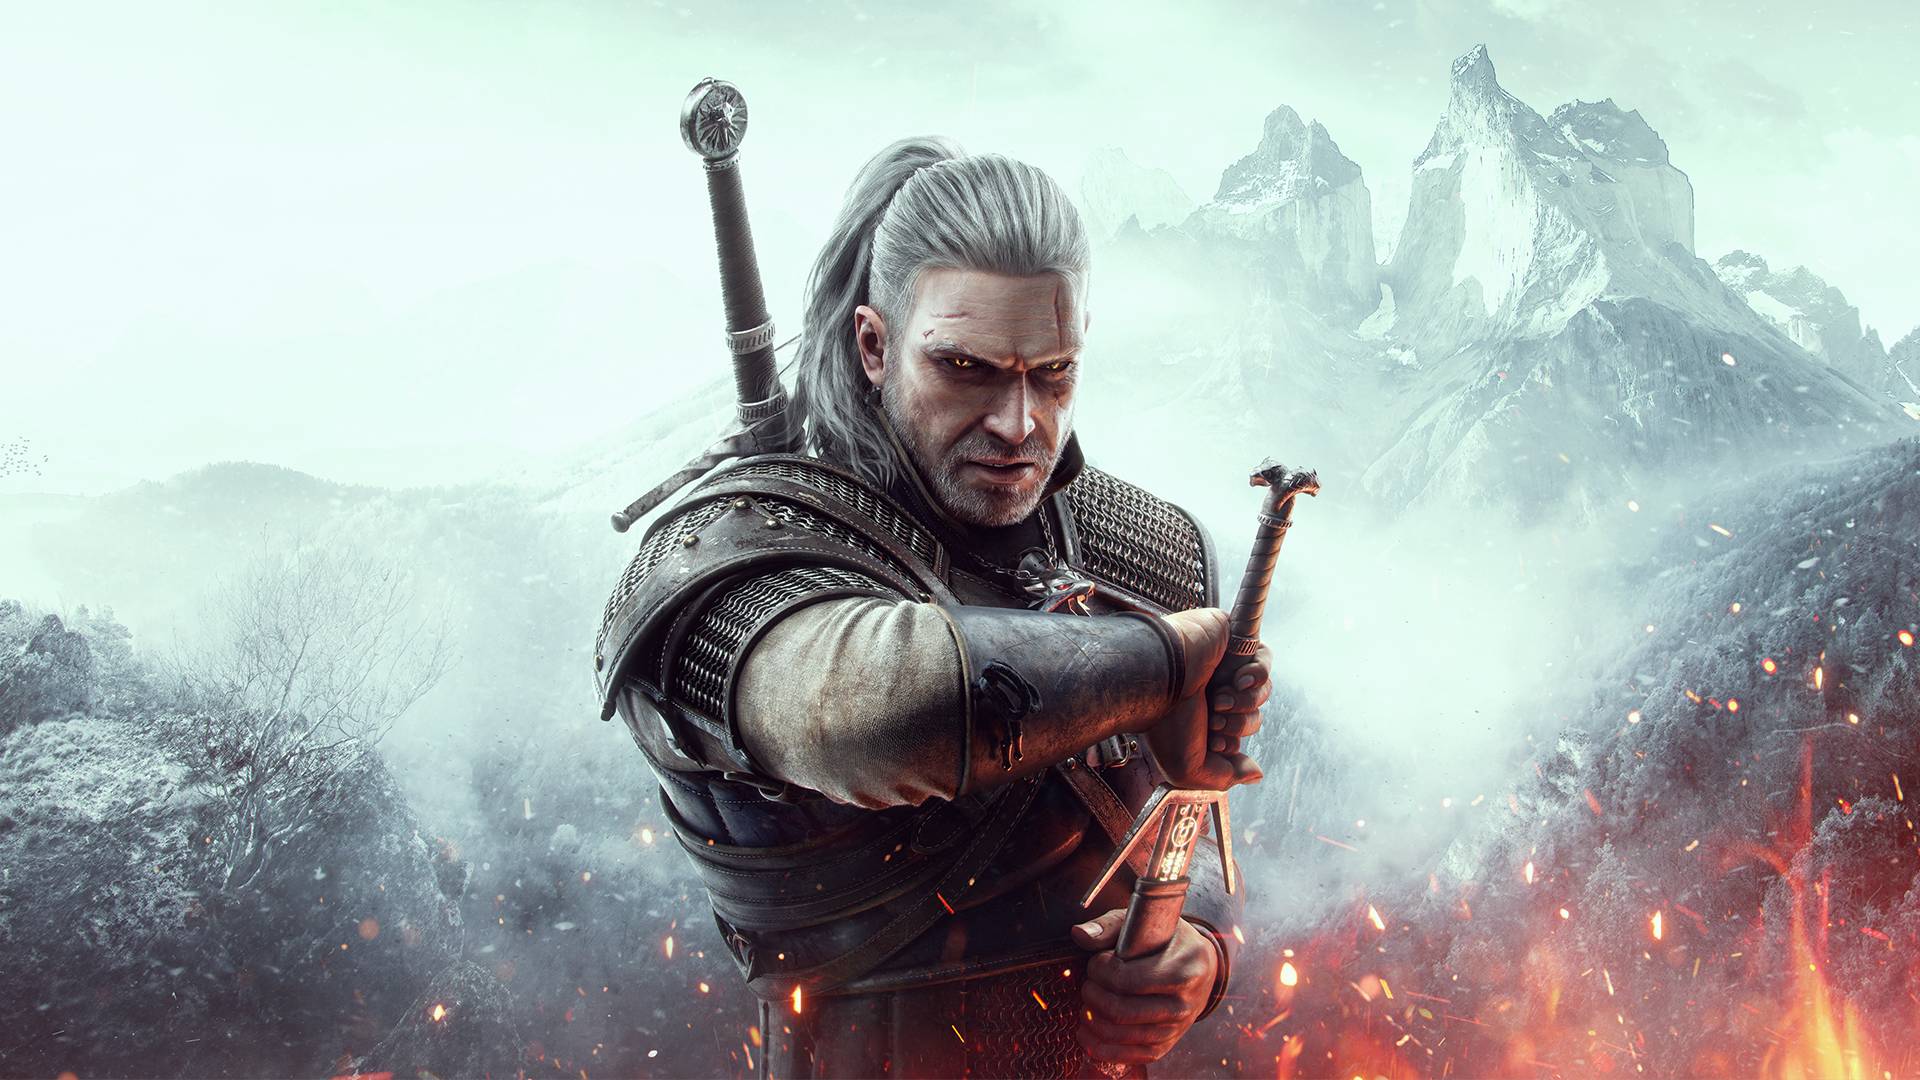 Are 'The Witcher' Games Part of the Fictional Universe's Canon?